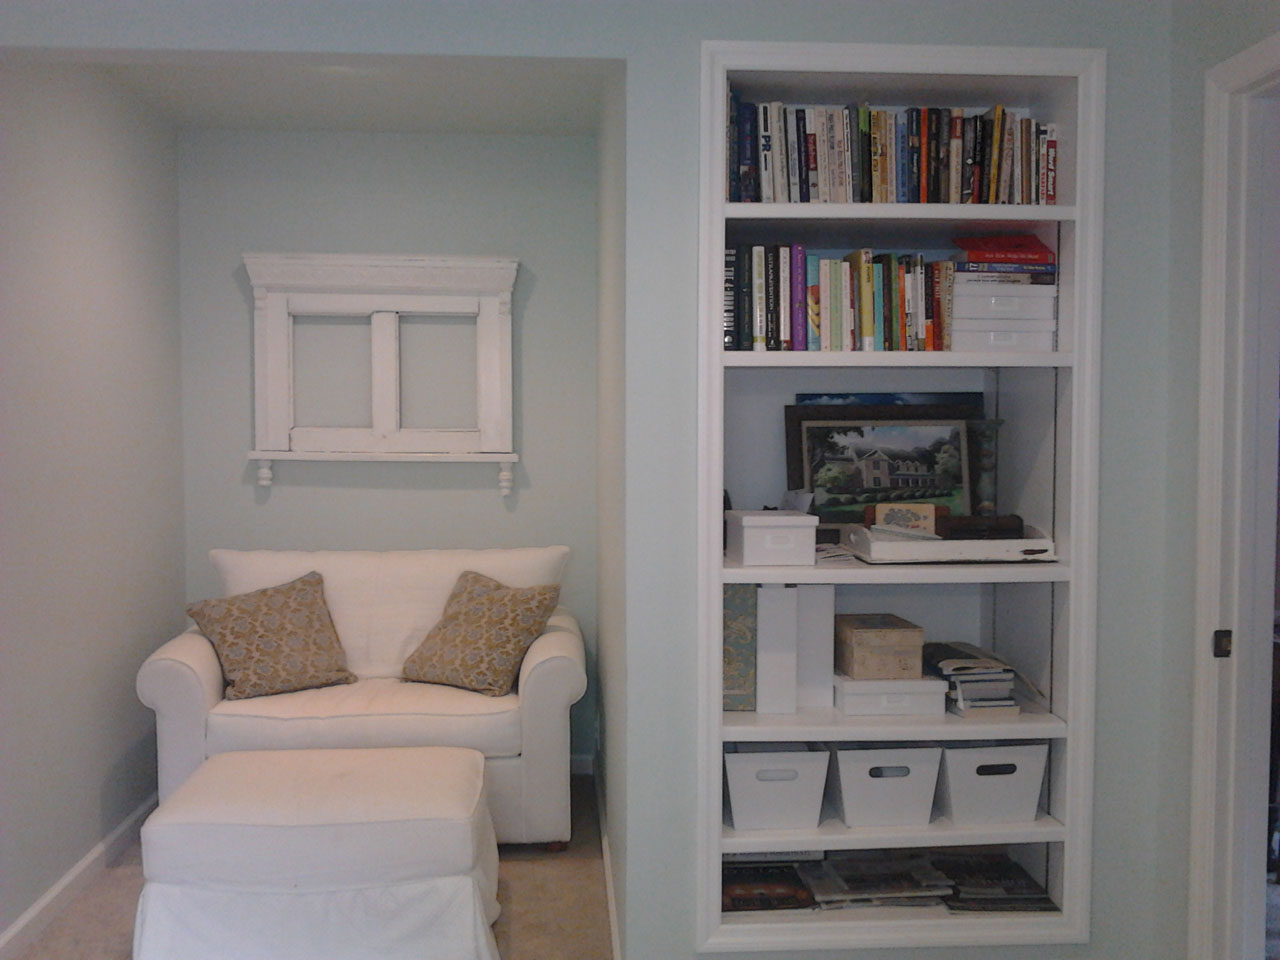 Home Office book shelving and seating